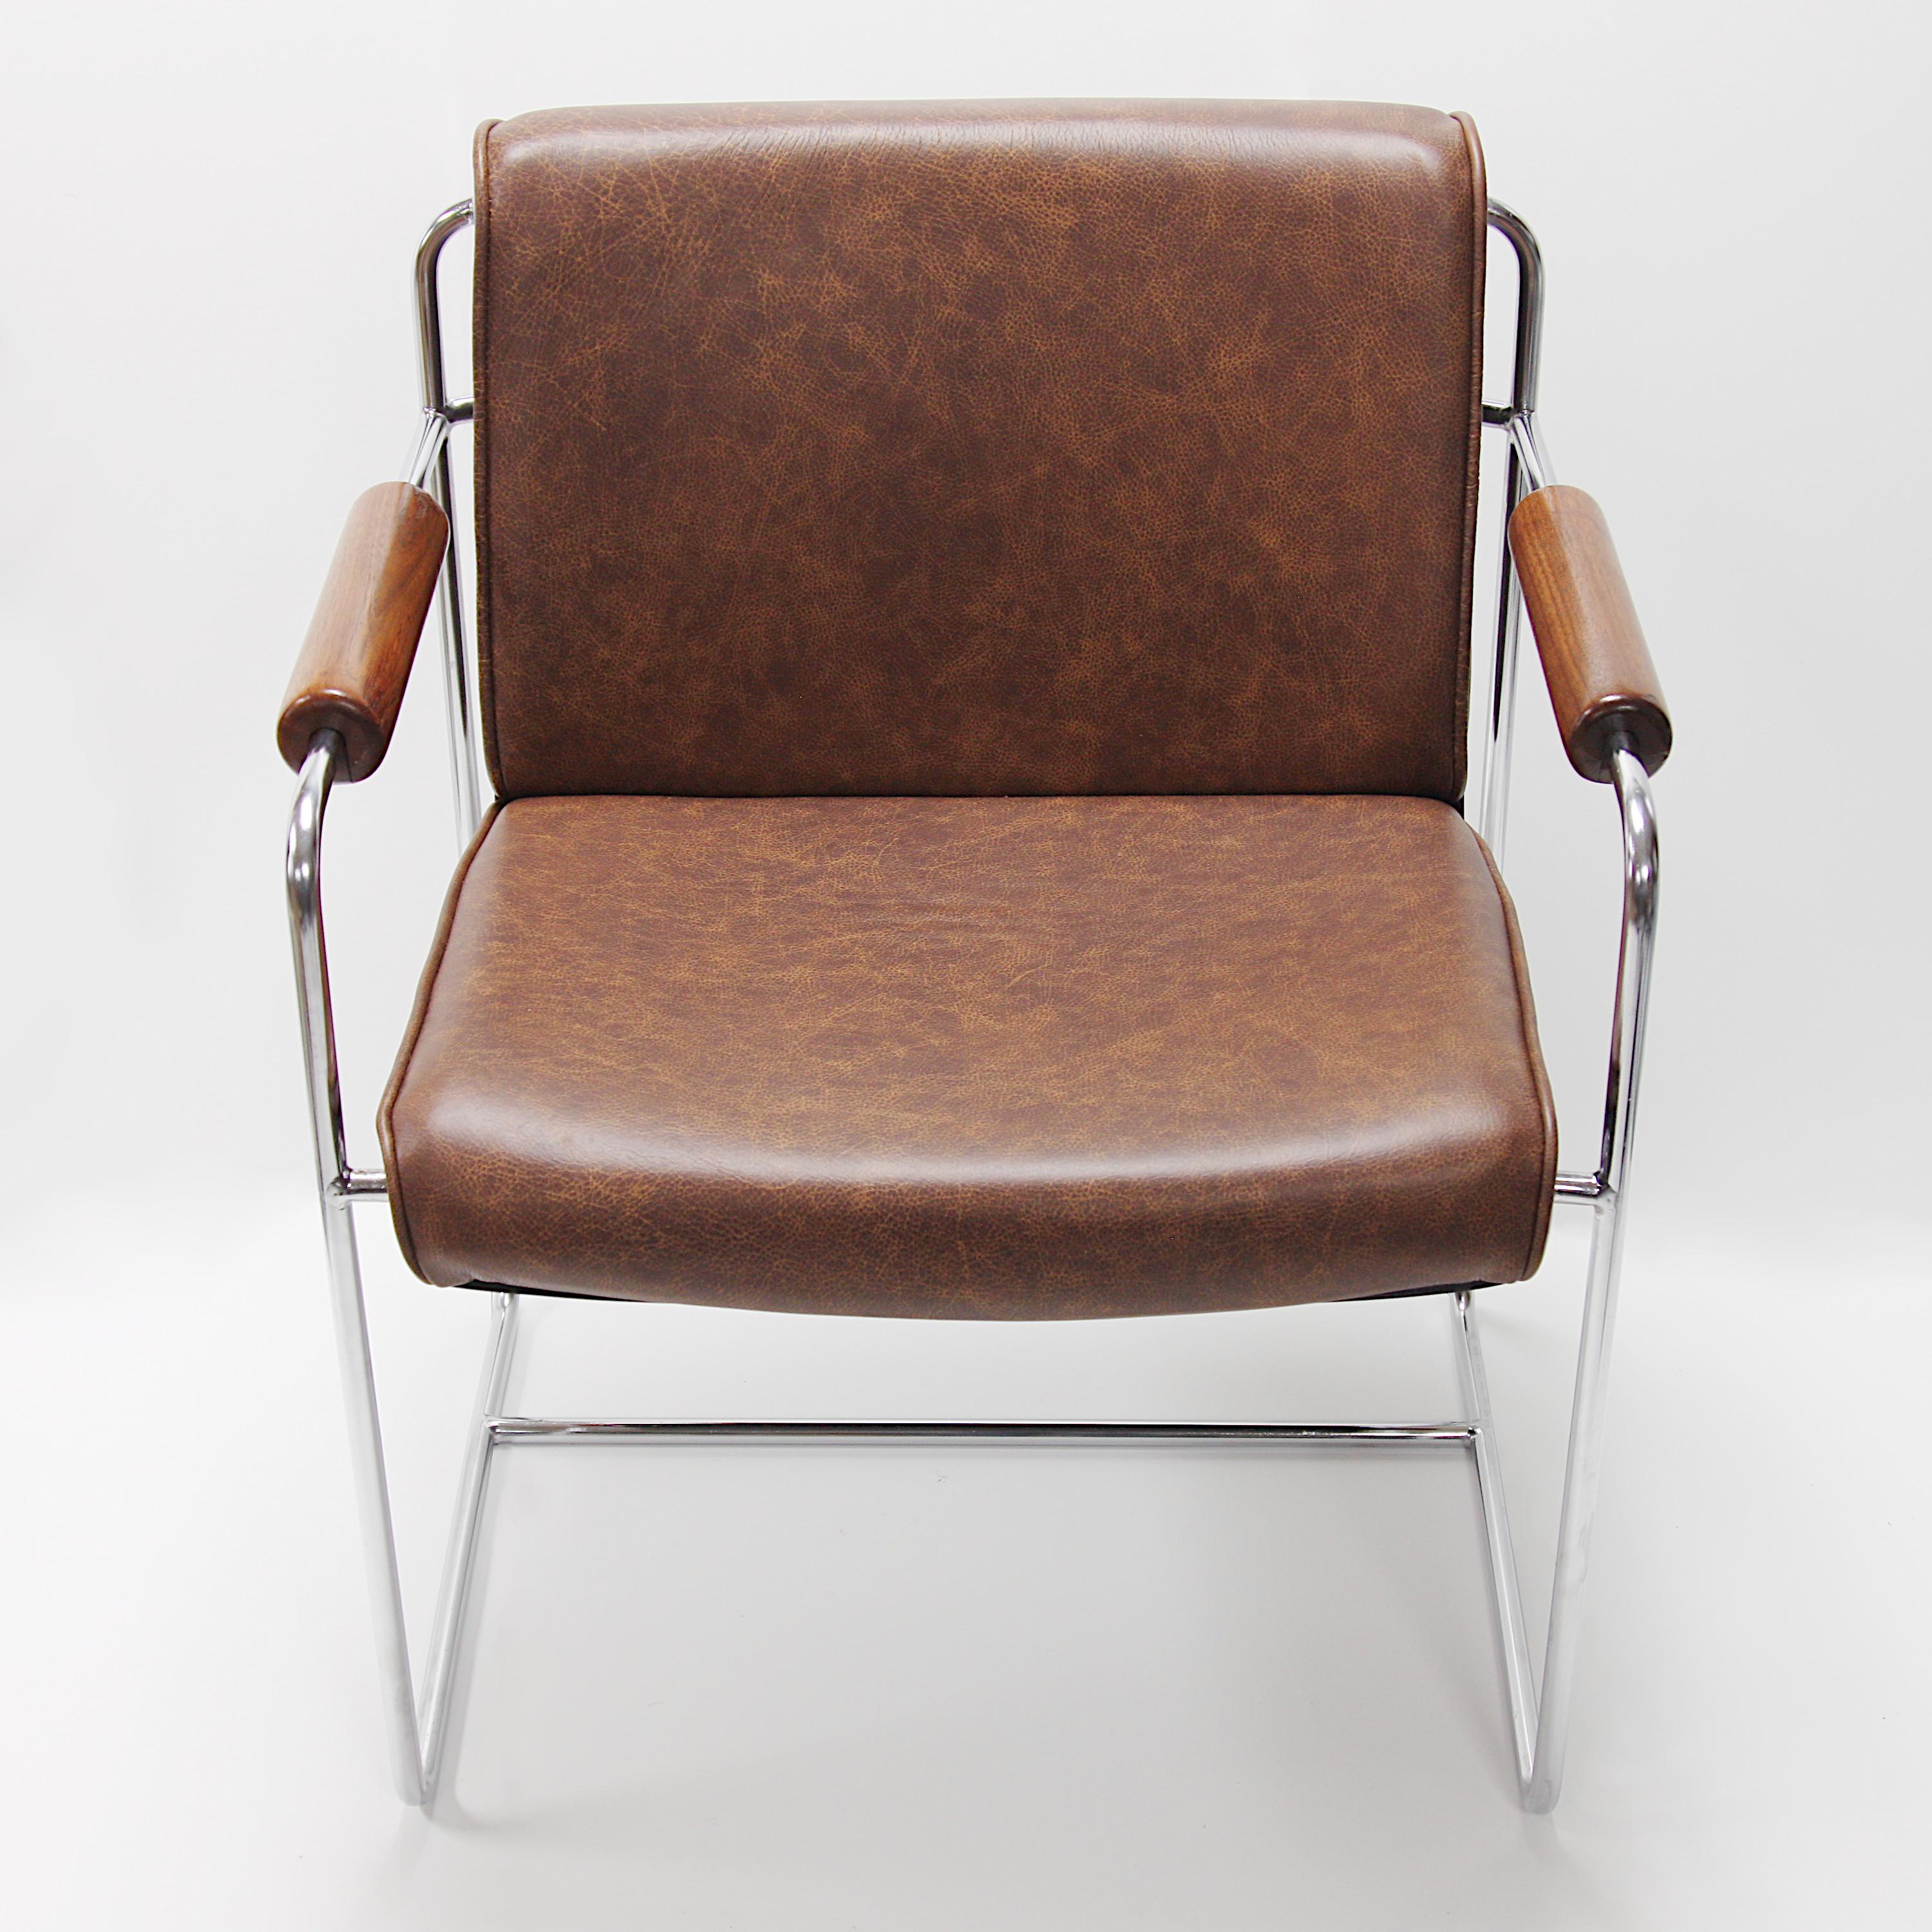 Rare Pair of Mid-Century Modern Fiberglass and Brown Leather Shell Lounge Chairs For Sale 1